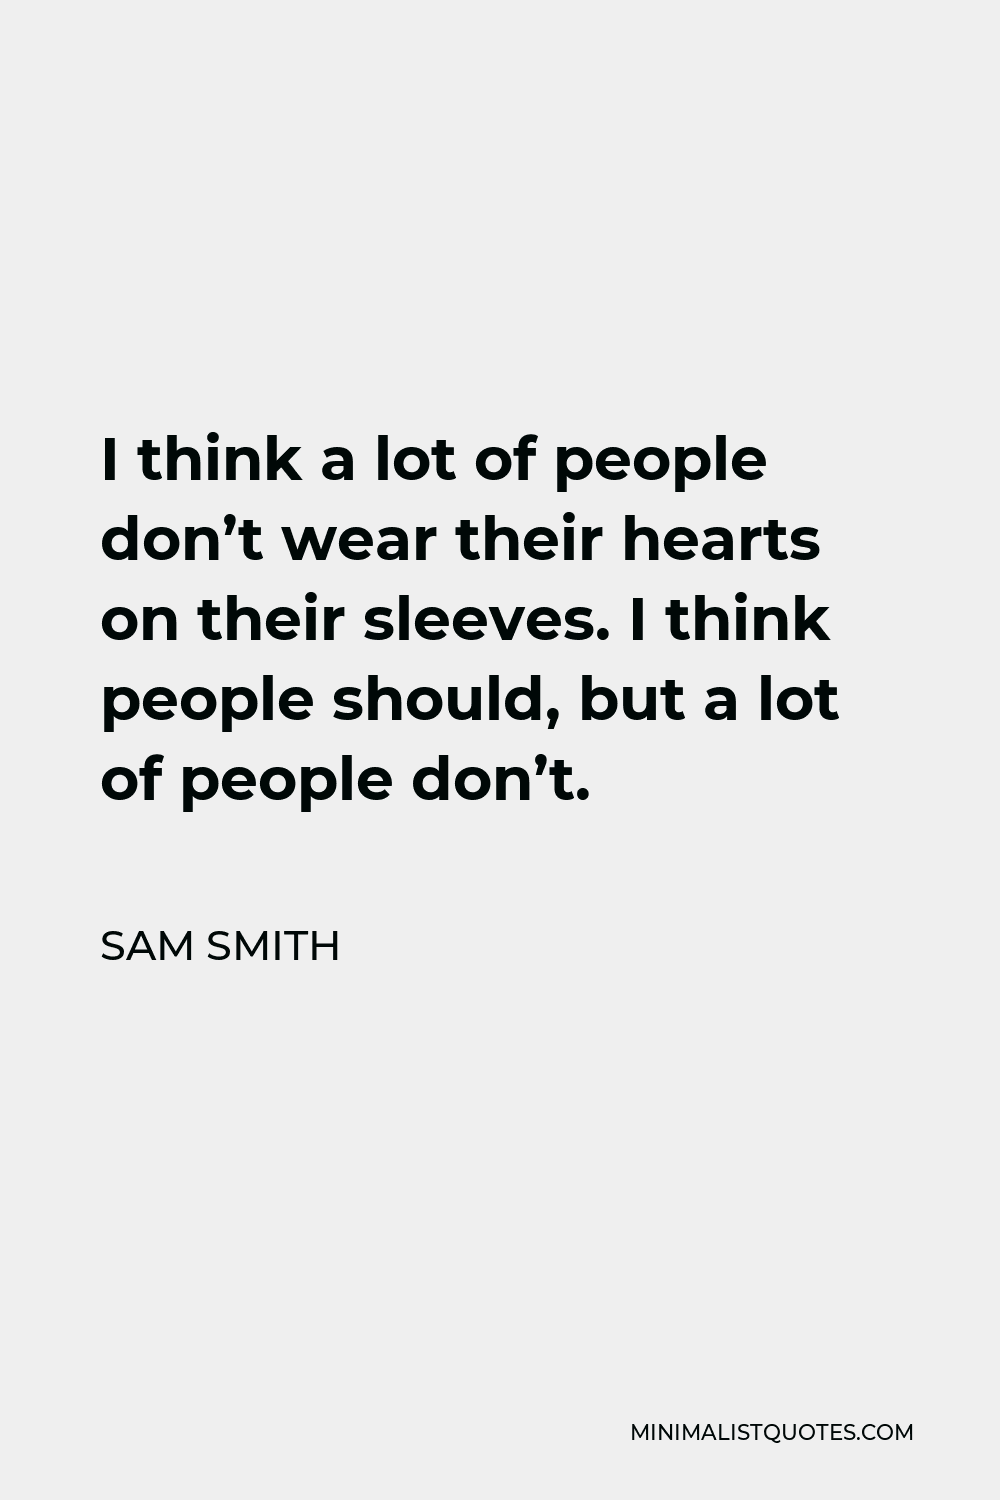 Sam Smith Quote - I think a lot of people don’t wear their hearts on their sleeves. I think people should, but a lot of people don’t.